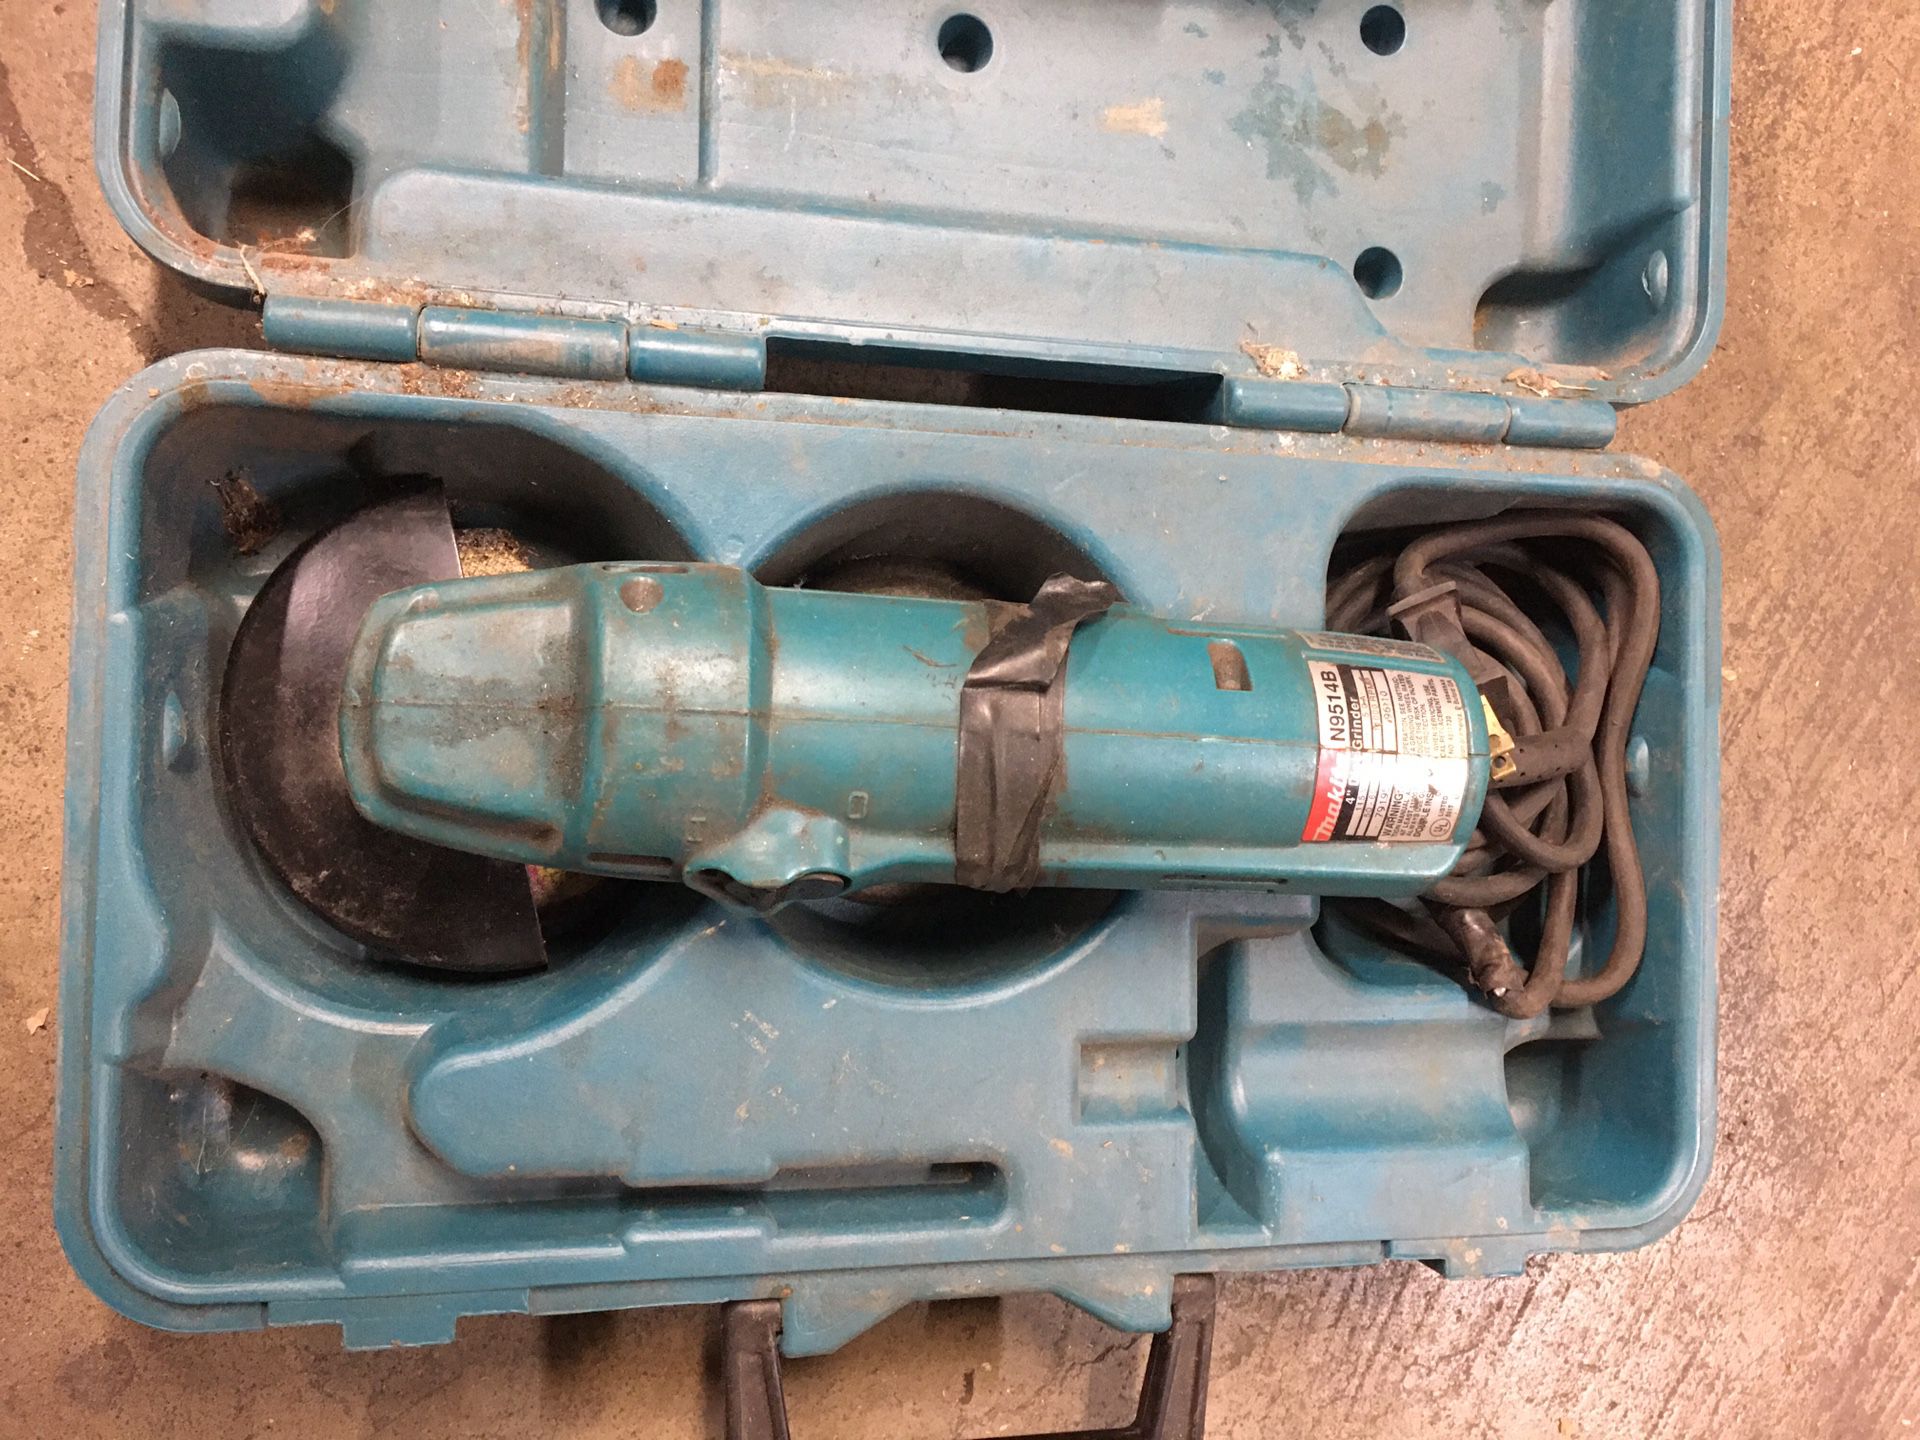 Used Makita 4” disc grinder small power tool